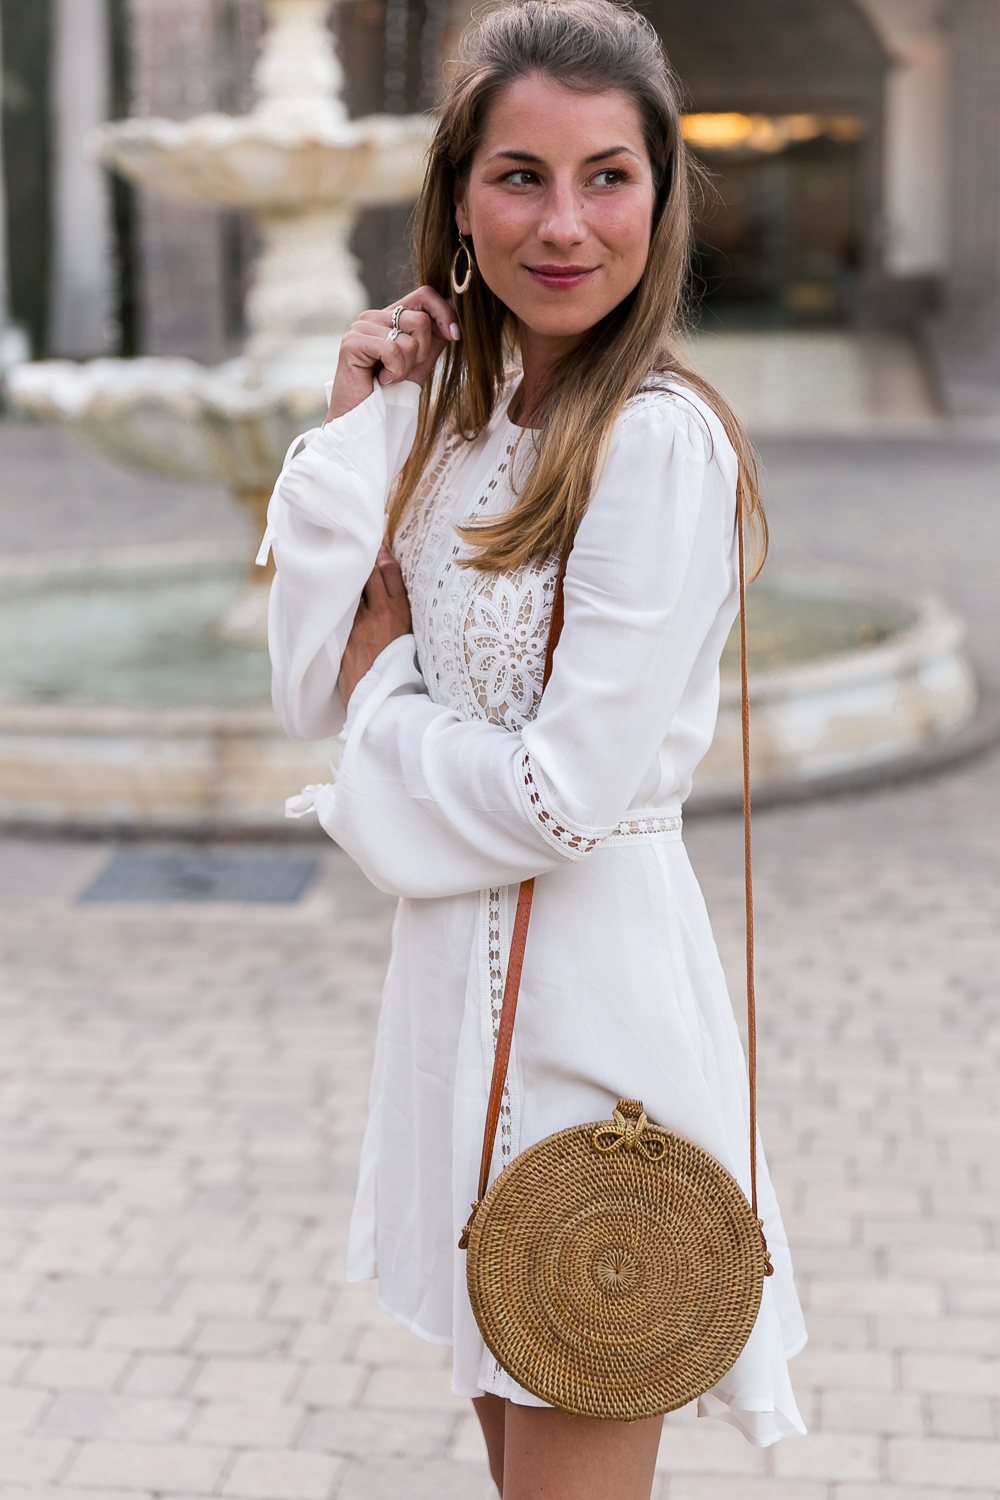 round bali bag straw summer dress white chicwish isabel marant sandals outfit 2017 trends fashion blog